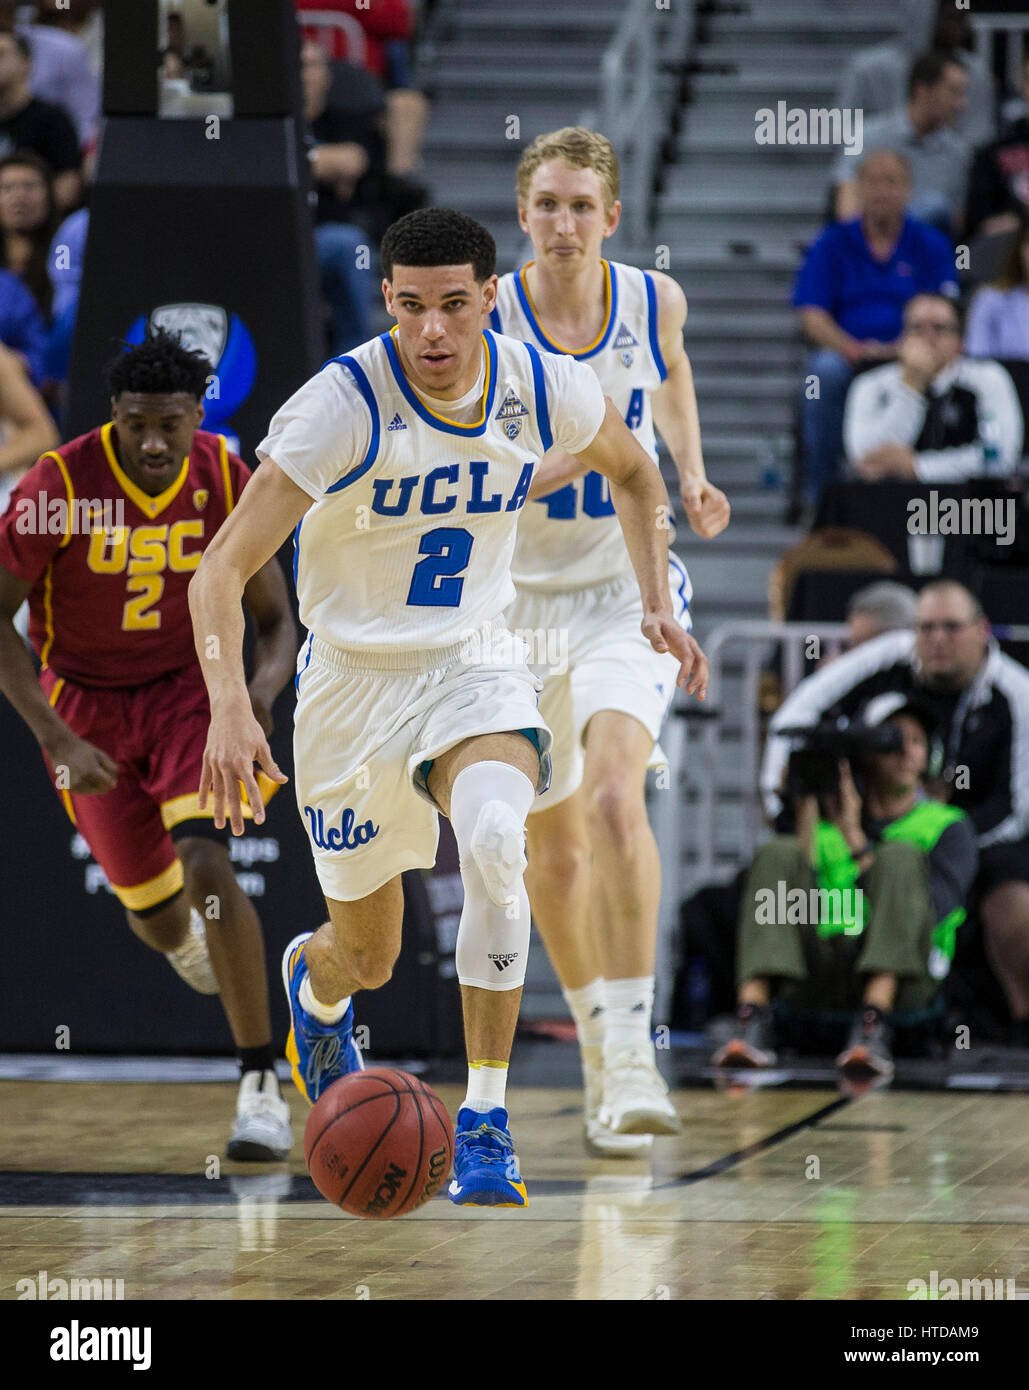 Mar 09 2017 Las Vegas, NV, U.S.A UCLA guard Lonzo Ball (2) scored 12 points, 4 rebound, 7 assist, 1 block shot and 1 steal brings the ball up court during the NCAA Pac 12 Men's Basketball Tournament between UCLA Bruins and USC Trojans 76-74 win at T Mobile Arena Las Vegas, NV. Thurman James/CSM Stock Photo